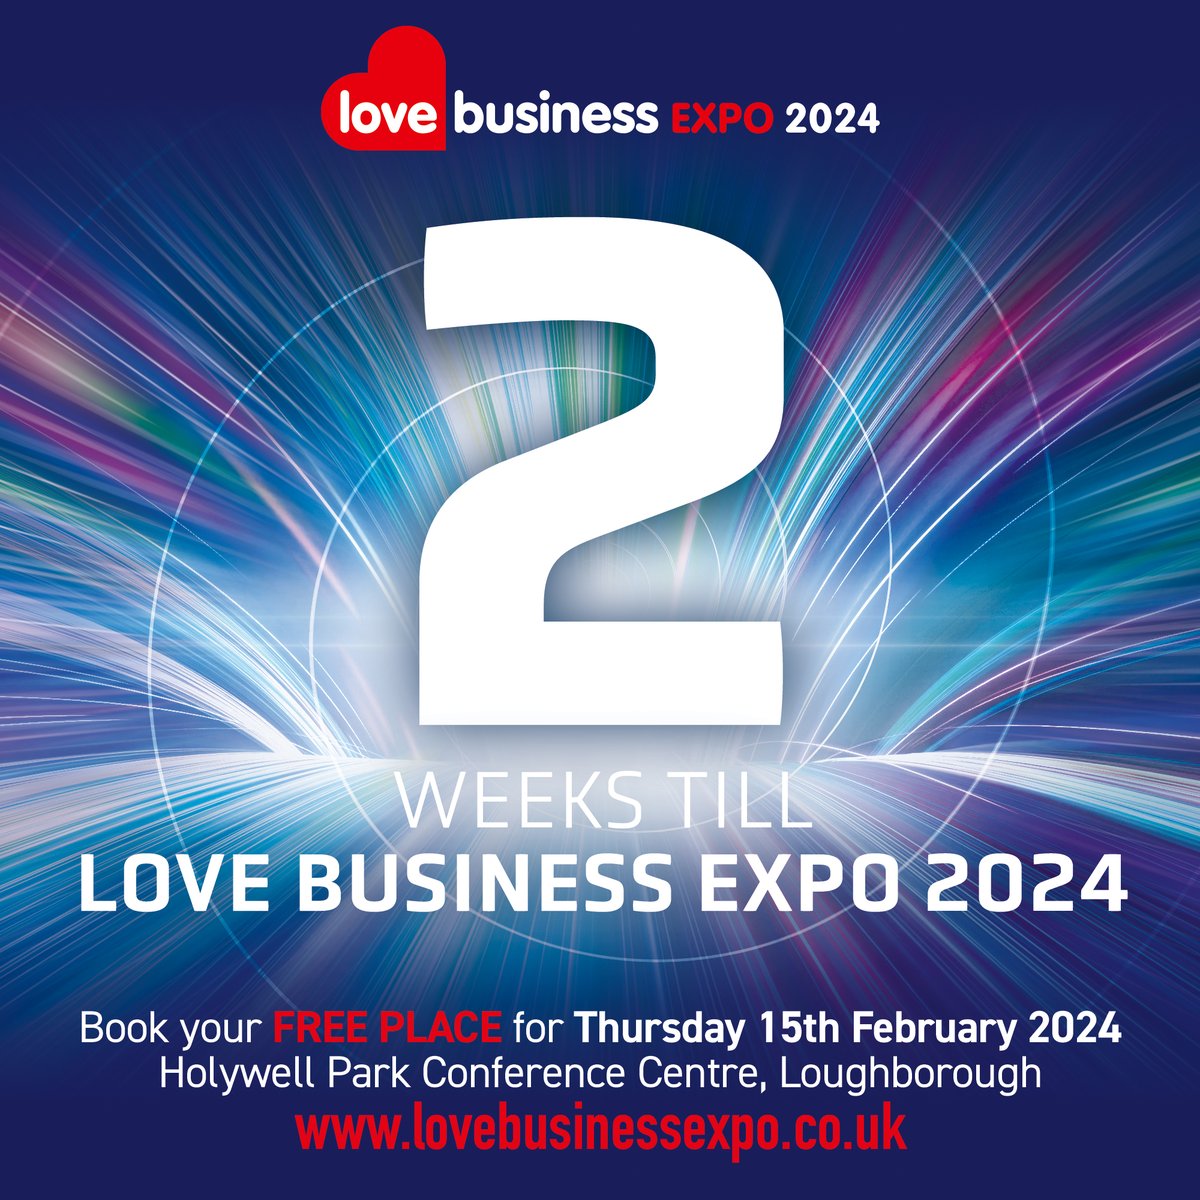 Only 2 Weeks till Love Business EXPO 2024! Thursday 15th February at Holywell Park Conference Centre in Loughborough. Book your FREE delegate ticket for Love Business EXPO 2024. lovebusinessexpo.co.uk #LoveBusinessEXPO #love #business #event #east #midlands #eastmidlands